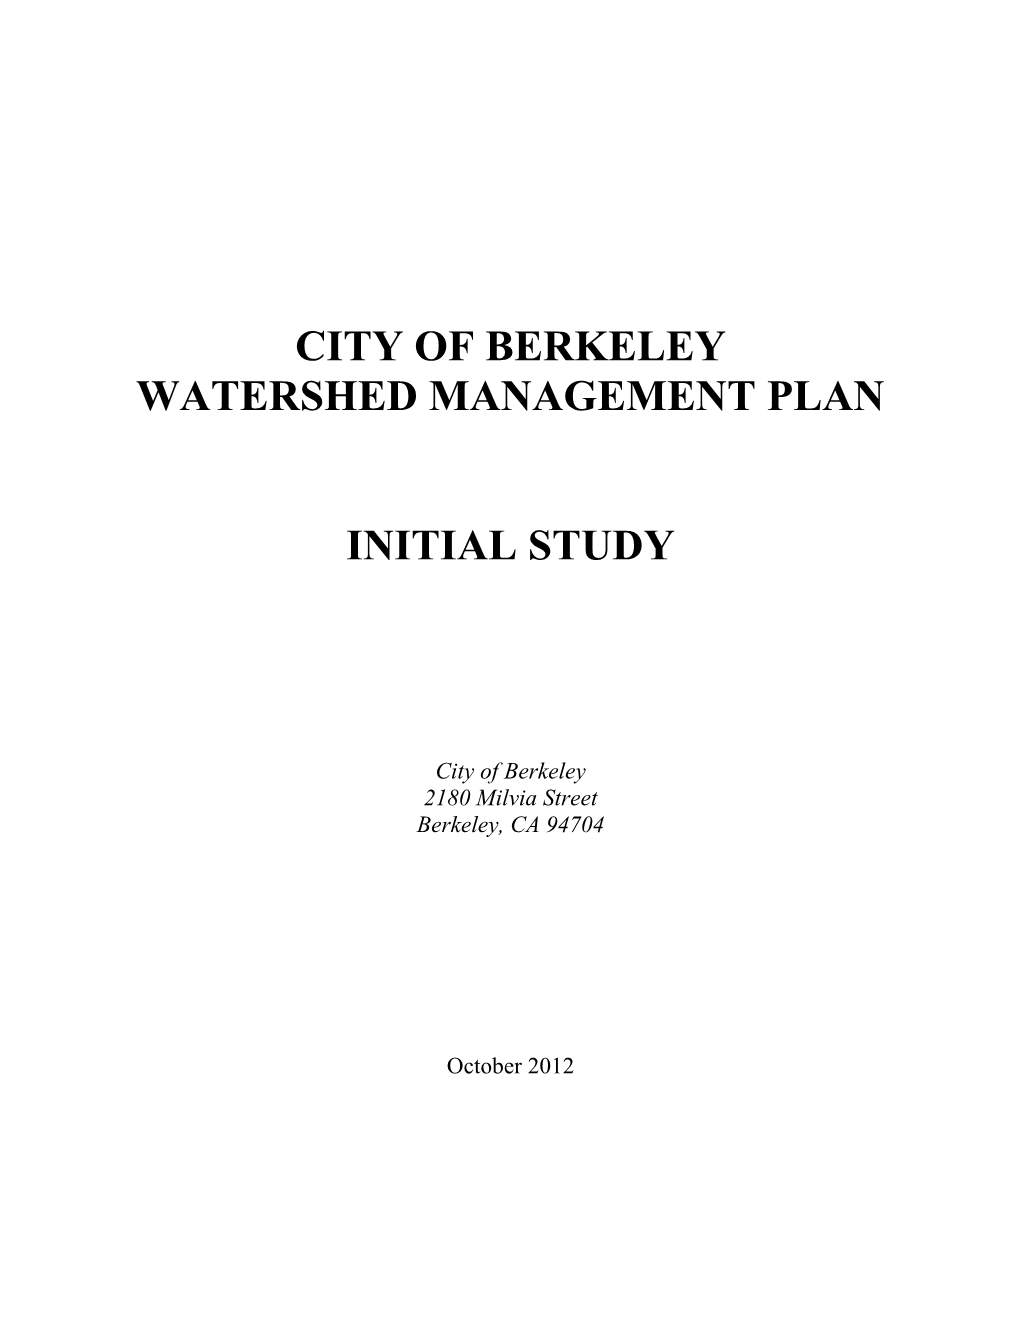 City of Berkeley Watershed Management Plan Initial